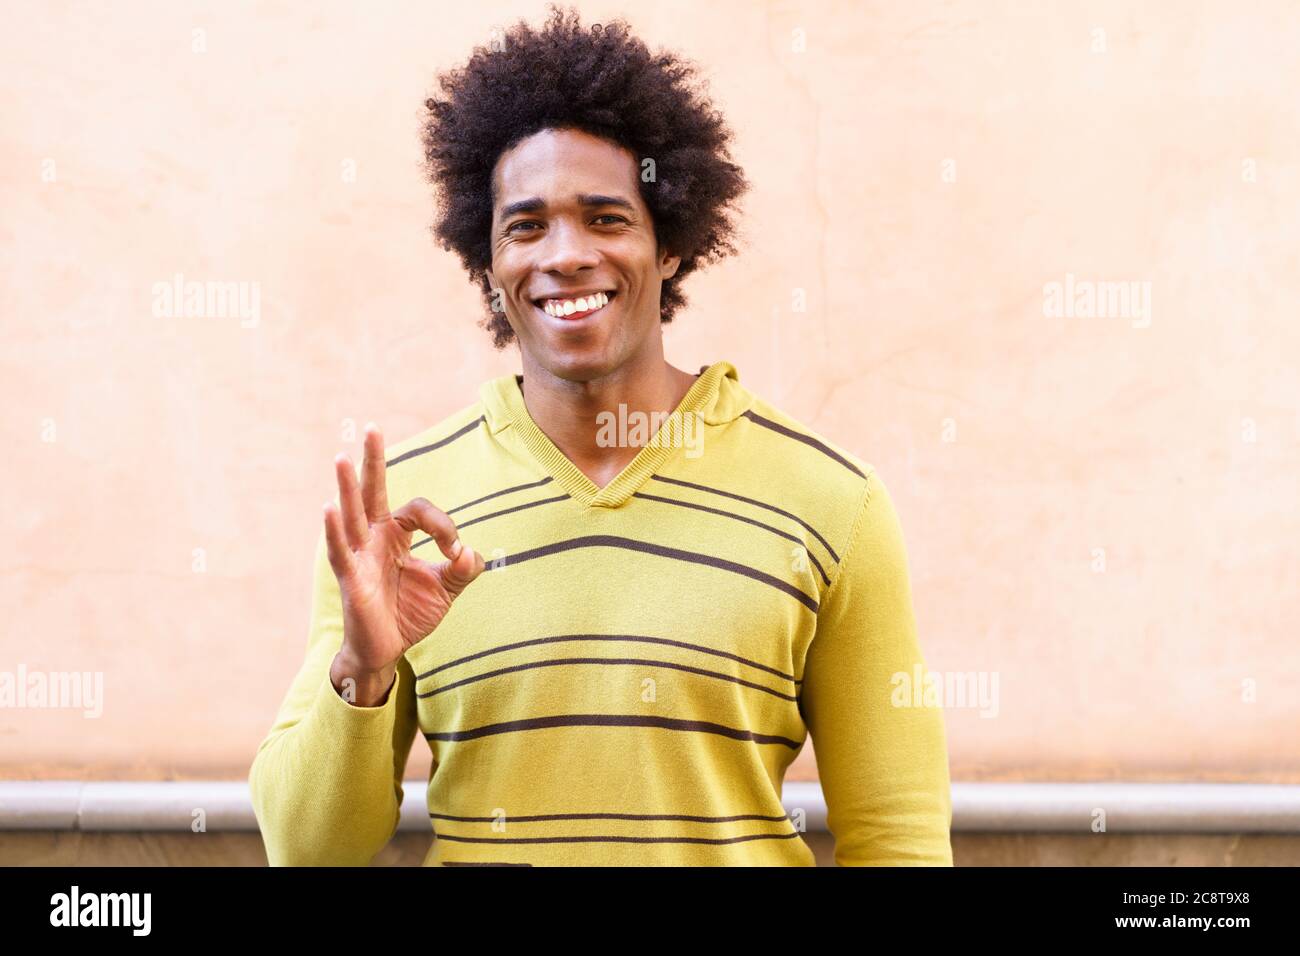 Black man with afro hair putting a funny expression Stock Photo